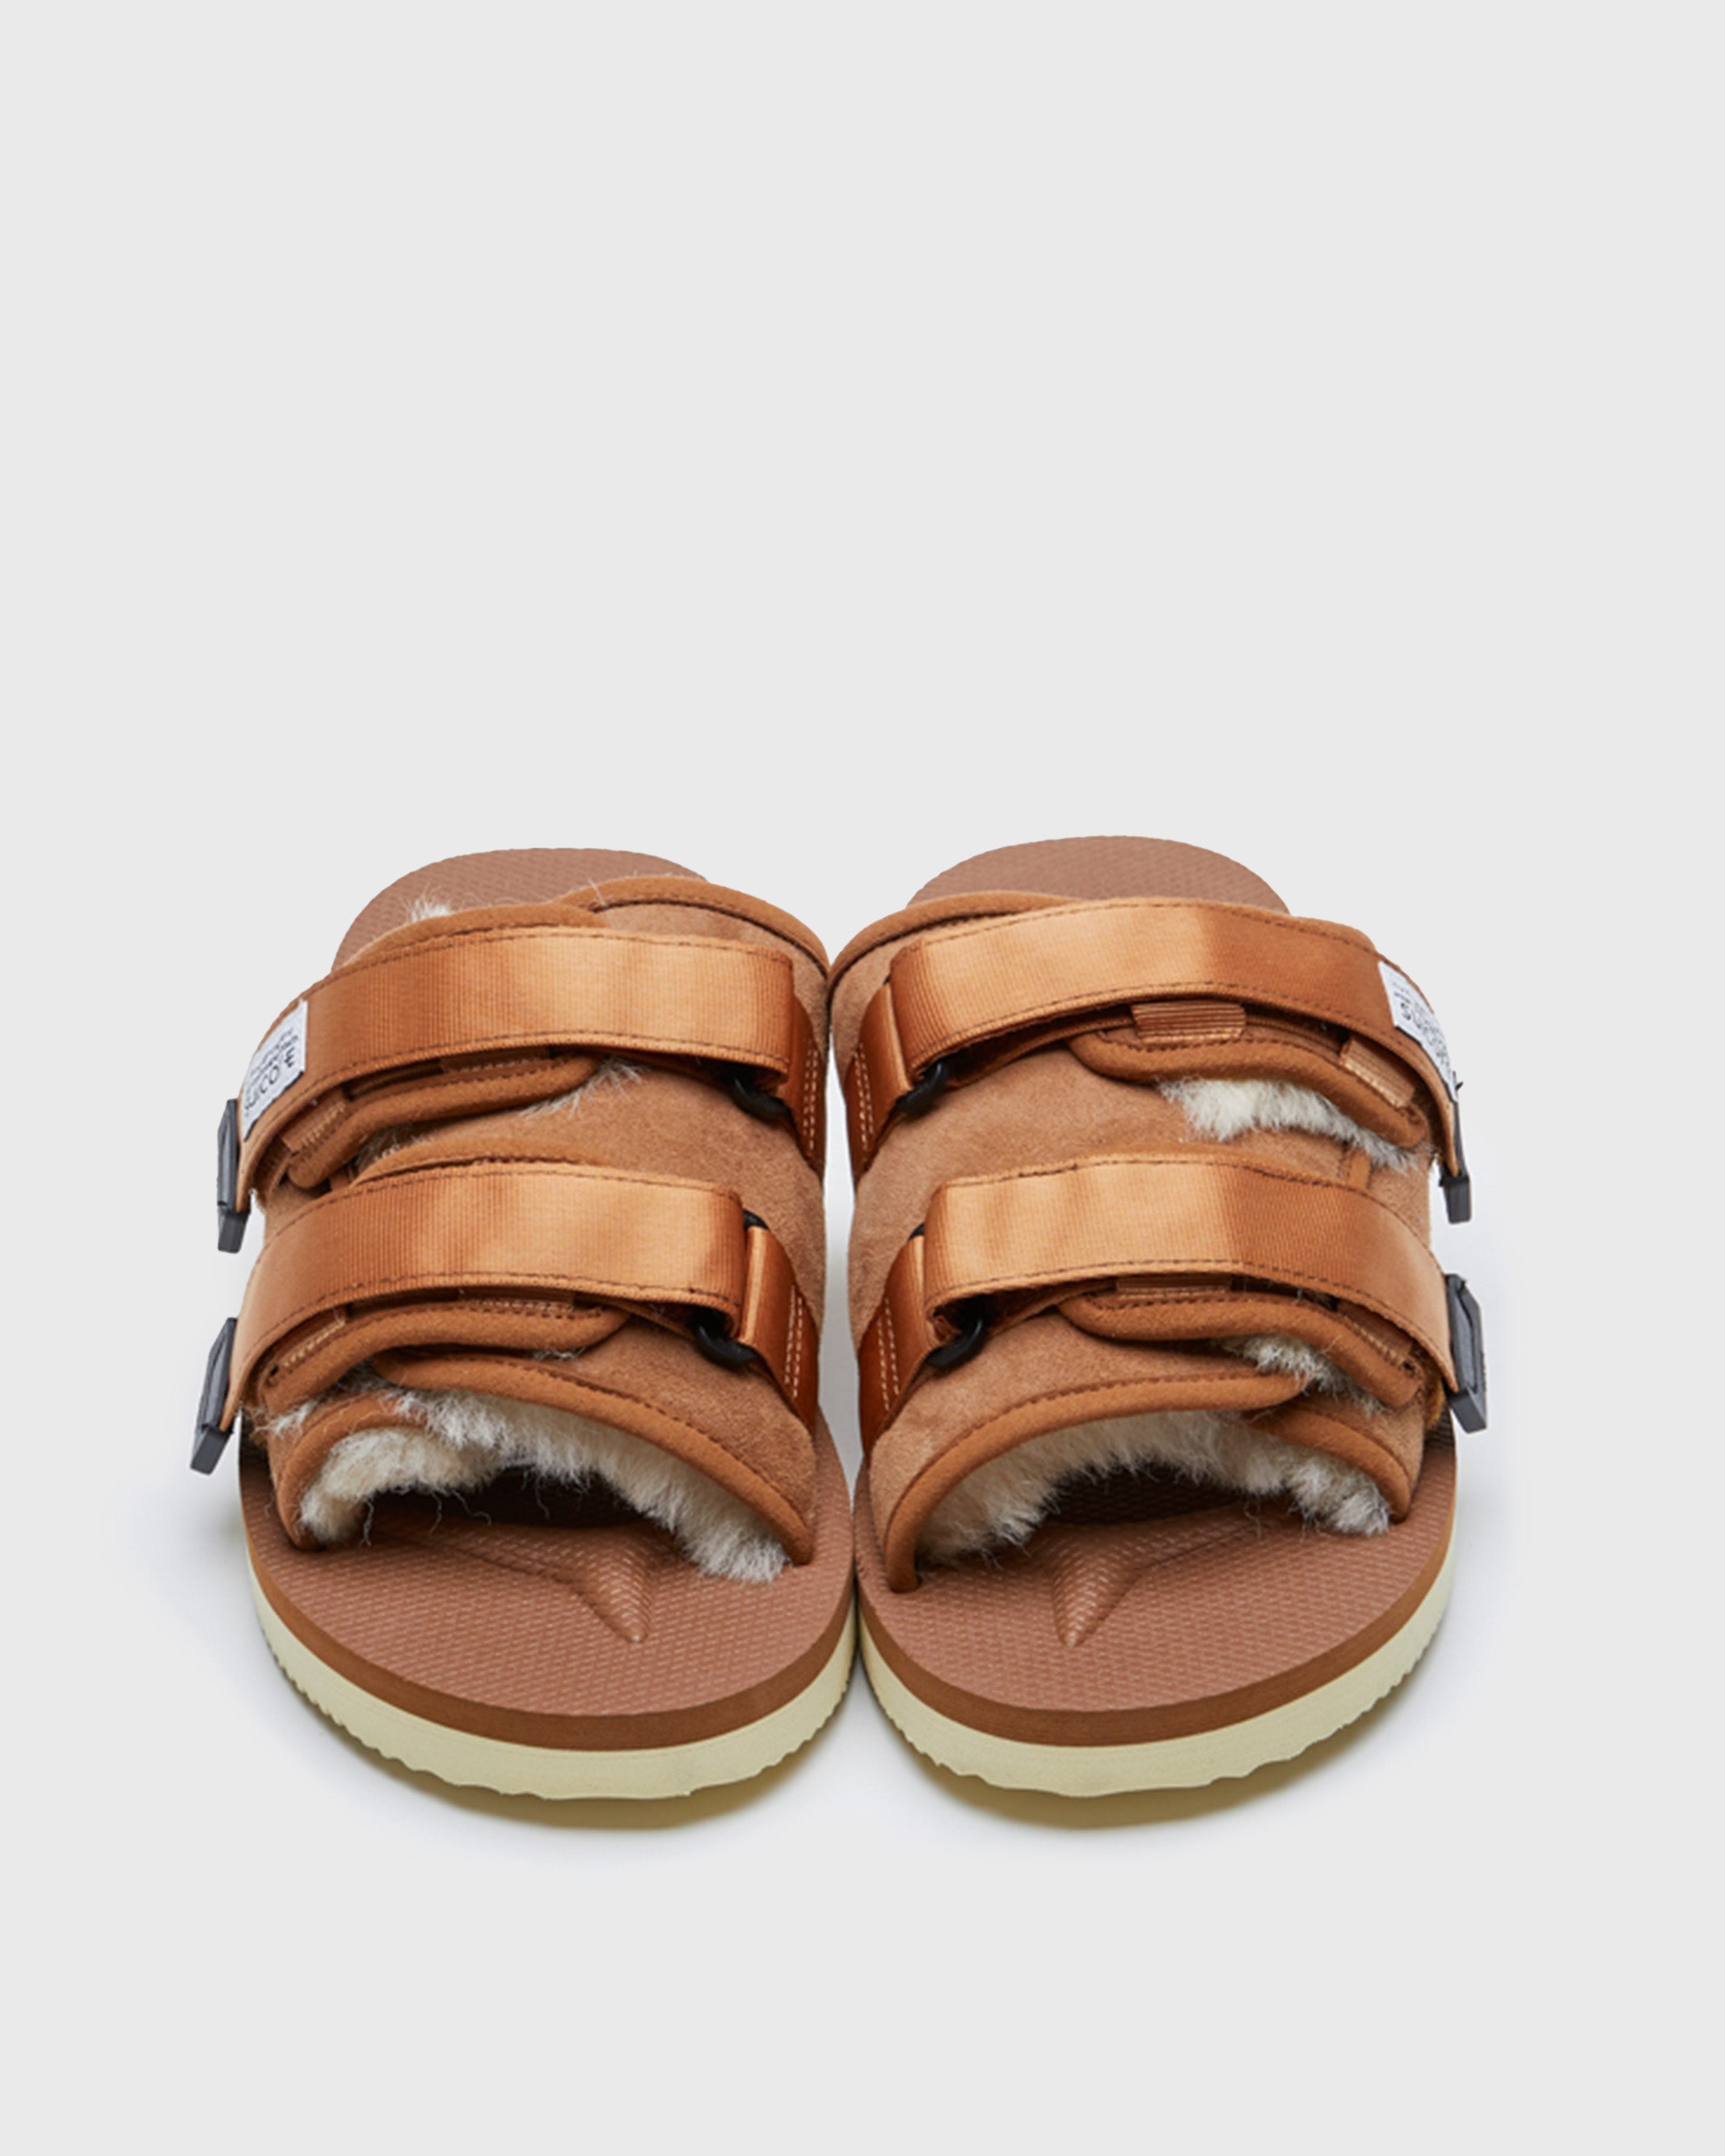 SUICOKE MOTO-M2ab in Brown OG-056M2AB | Shop from eightywingold an official brand partner for SUICOKE Canada and US.